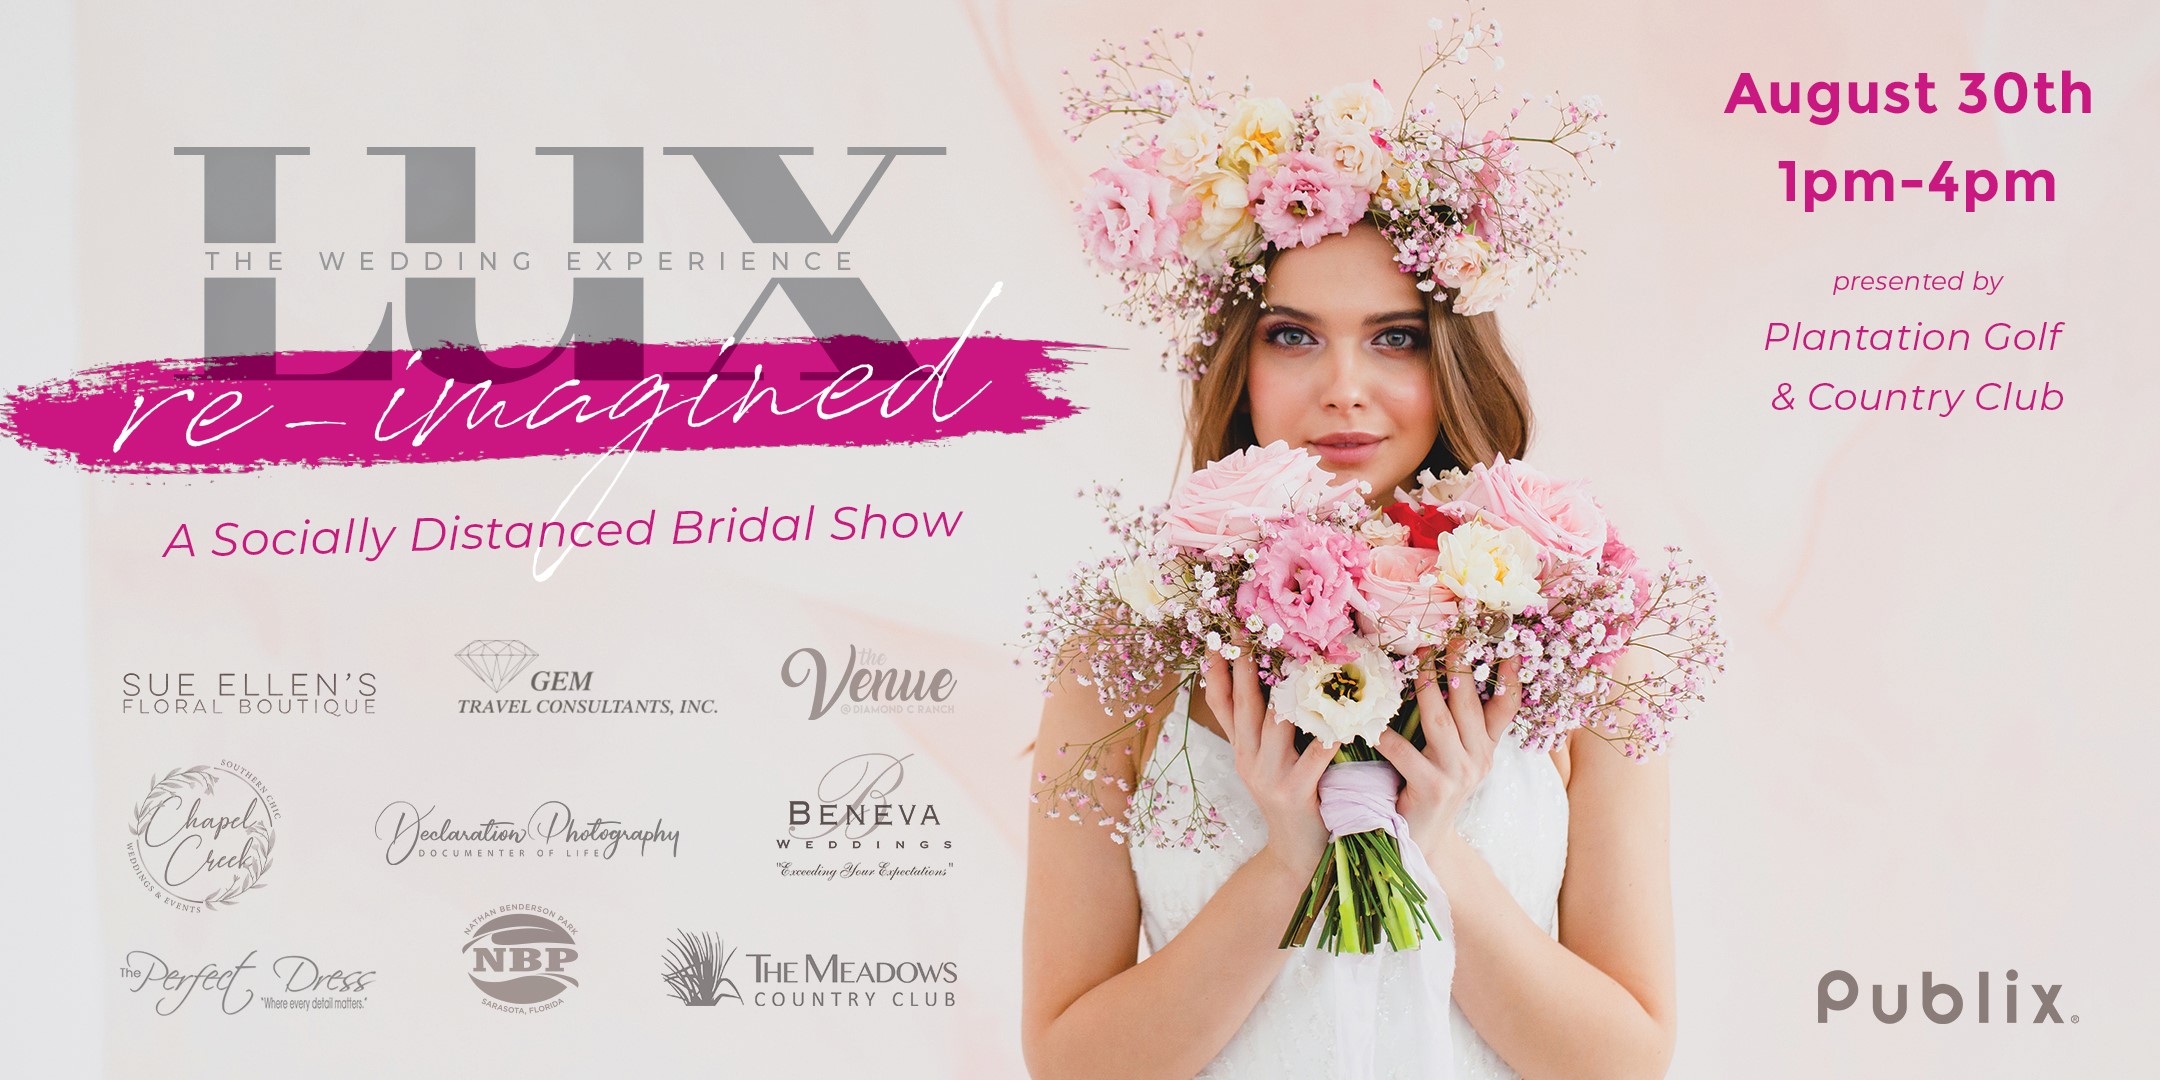 LUX Wedding Experience Bridal Show